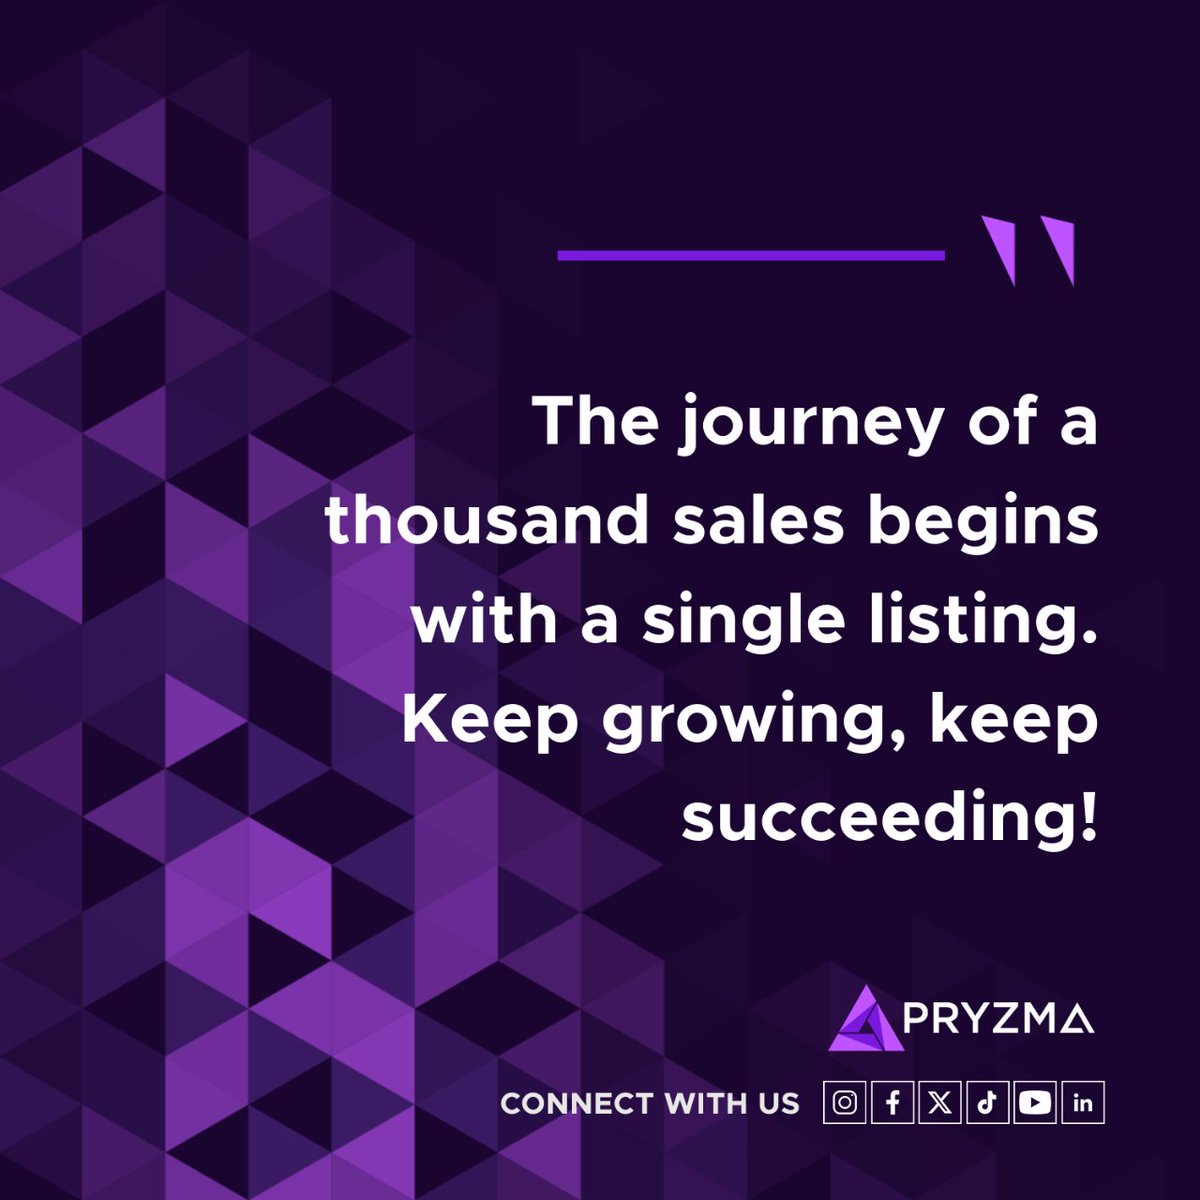 Your success story is built one listing at a time. Each new listing brings you closer to your sales goals. Keep growing, keep succeeding!

#smallbusiness #businessgrowth #ecommerce #ecommercebusiness #businessmotivation #amazonfba #amazonseller #ebayseller #walmartseller #pryzma